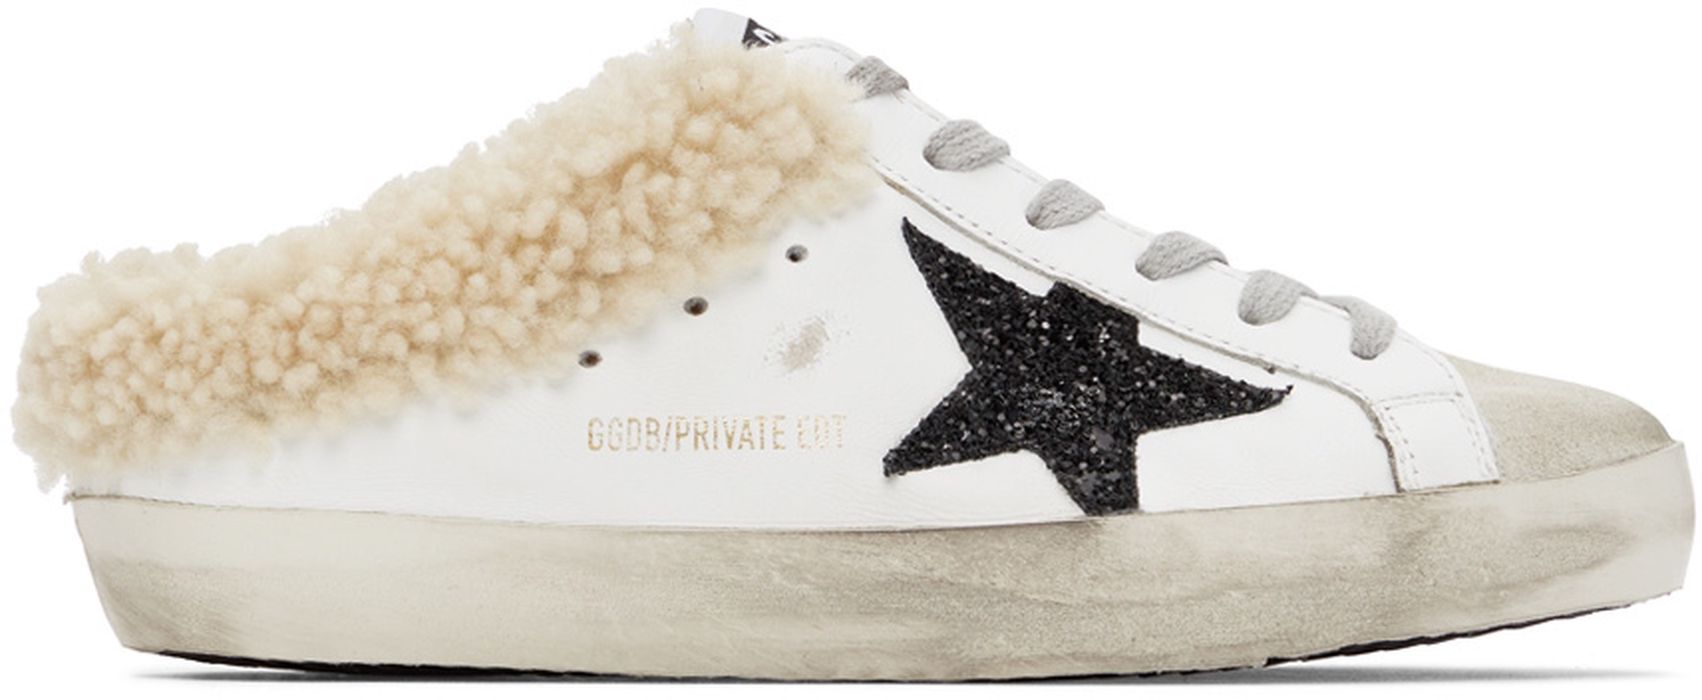 Golden Goose SSENSE Exclusive White & Black Shearling Super-Star Sneakers